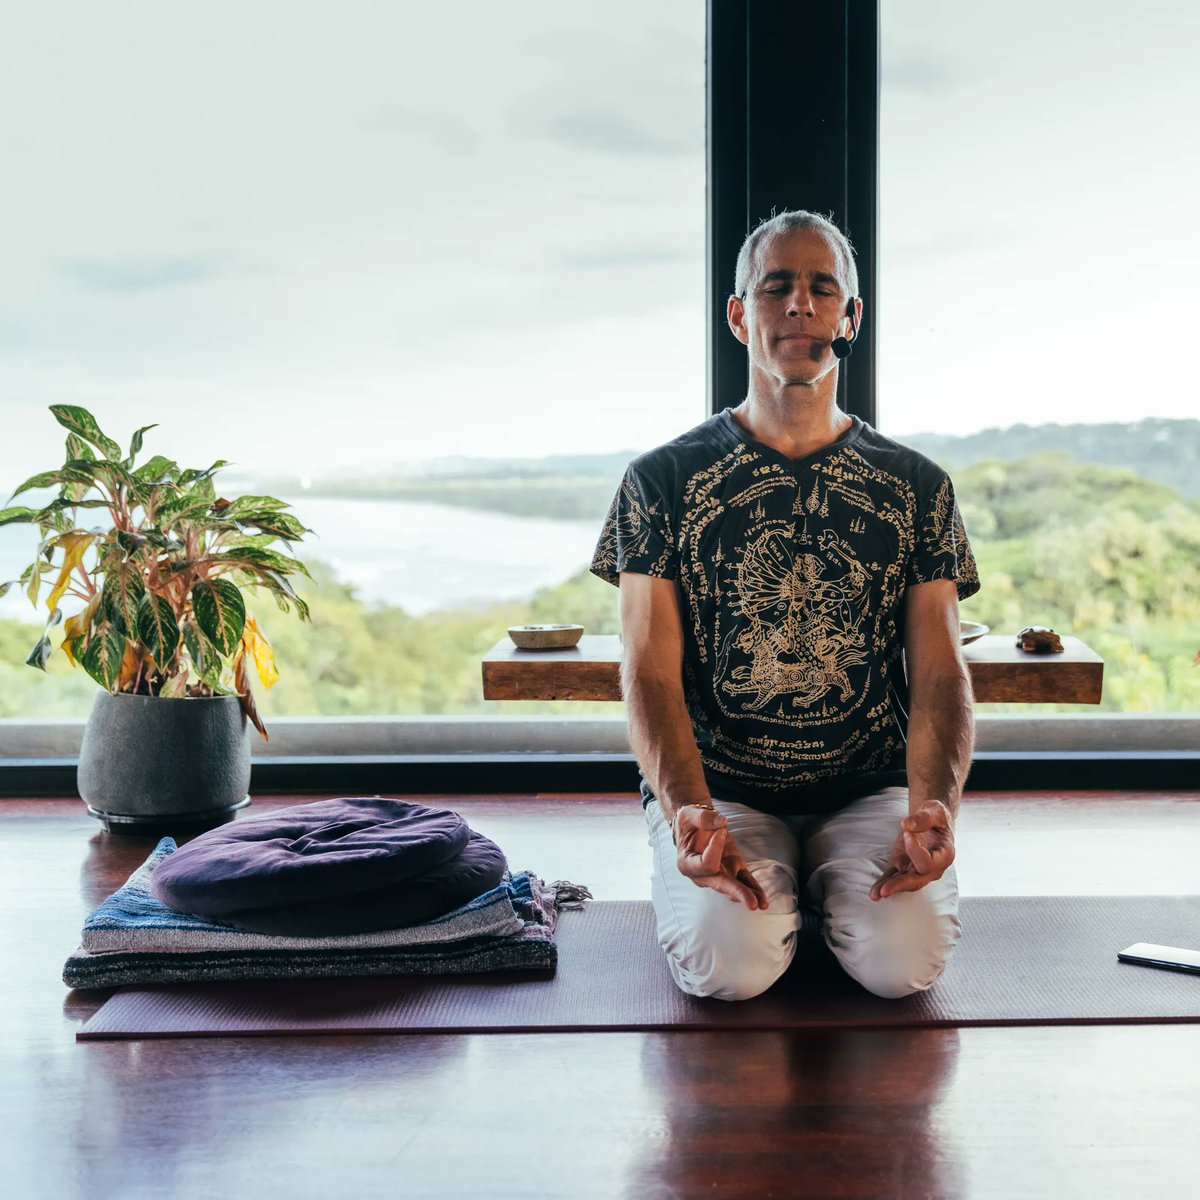 Tomorrow January 12th, Wednesday Yoga live in the Recovery 2.0 Membership at 7:30am PT. Natural High. Come join Tommy Rosen for a live yoga class focused on elevation and union of mind, body and soul. buff.ly/315cygJ